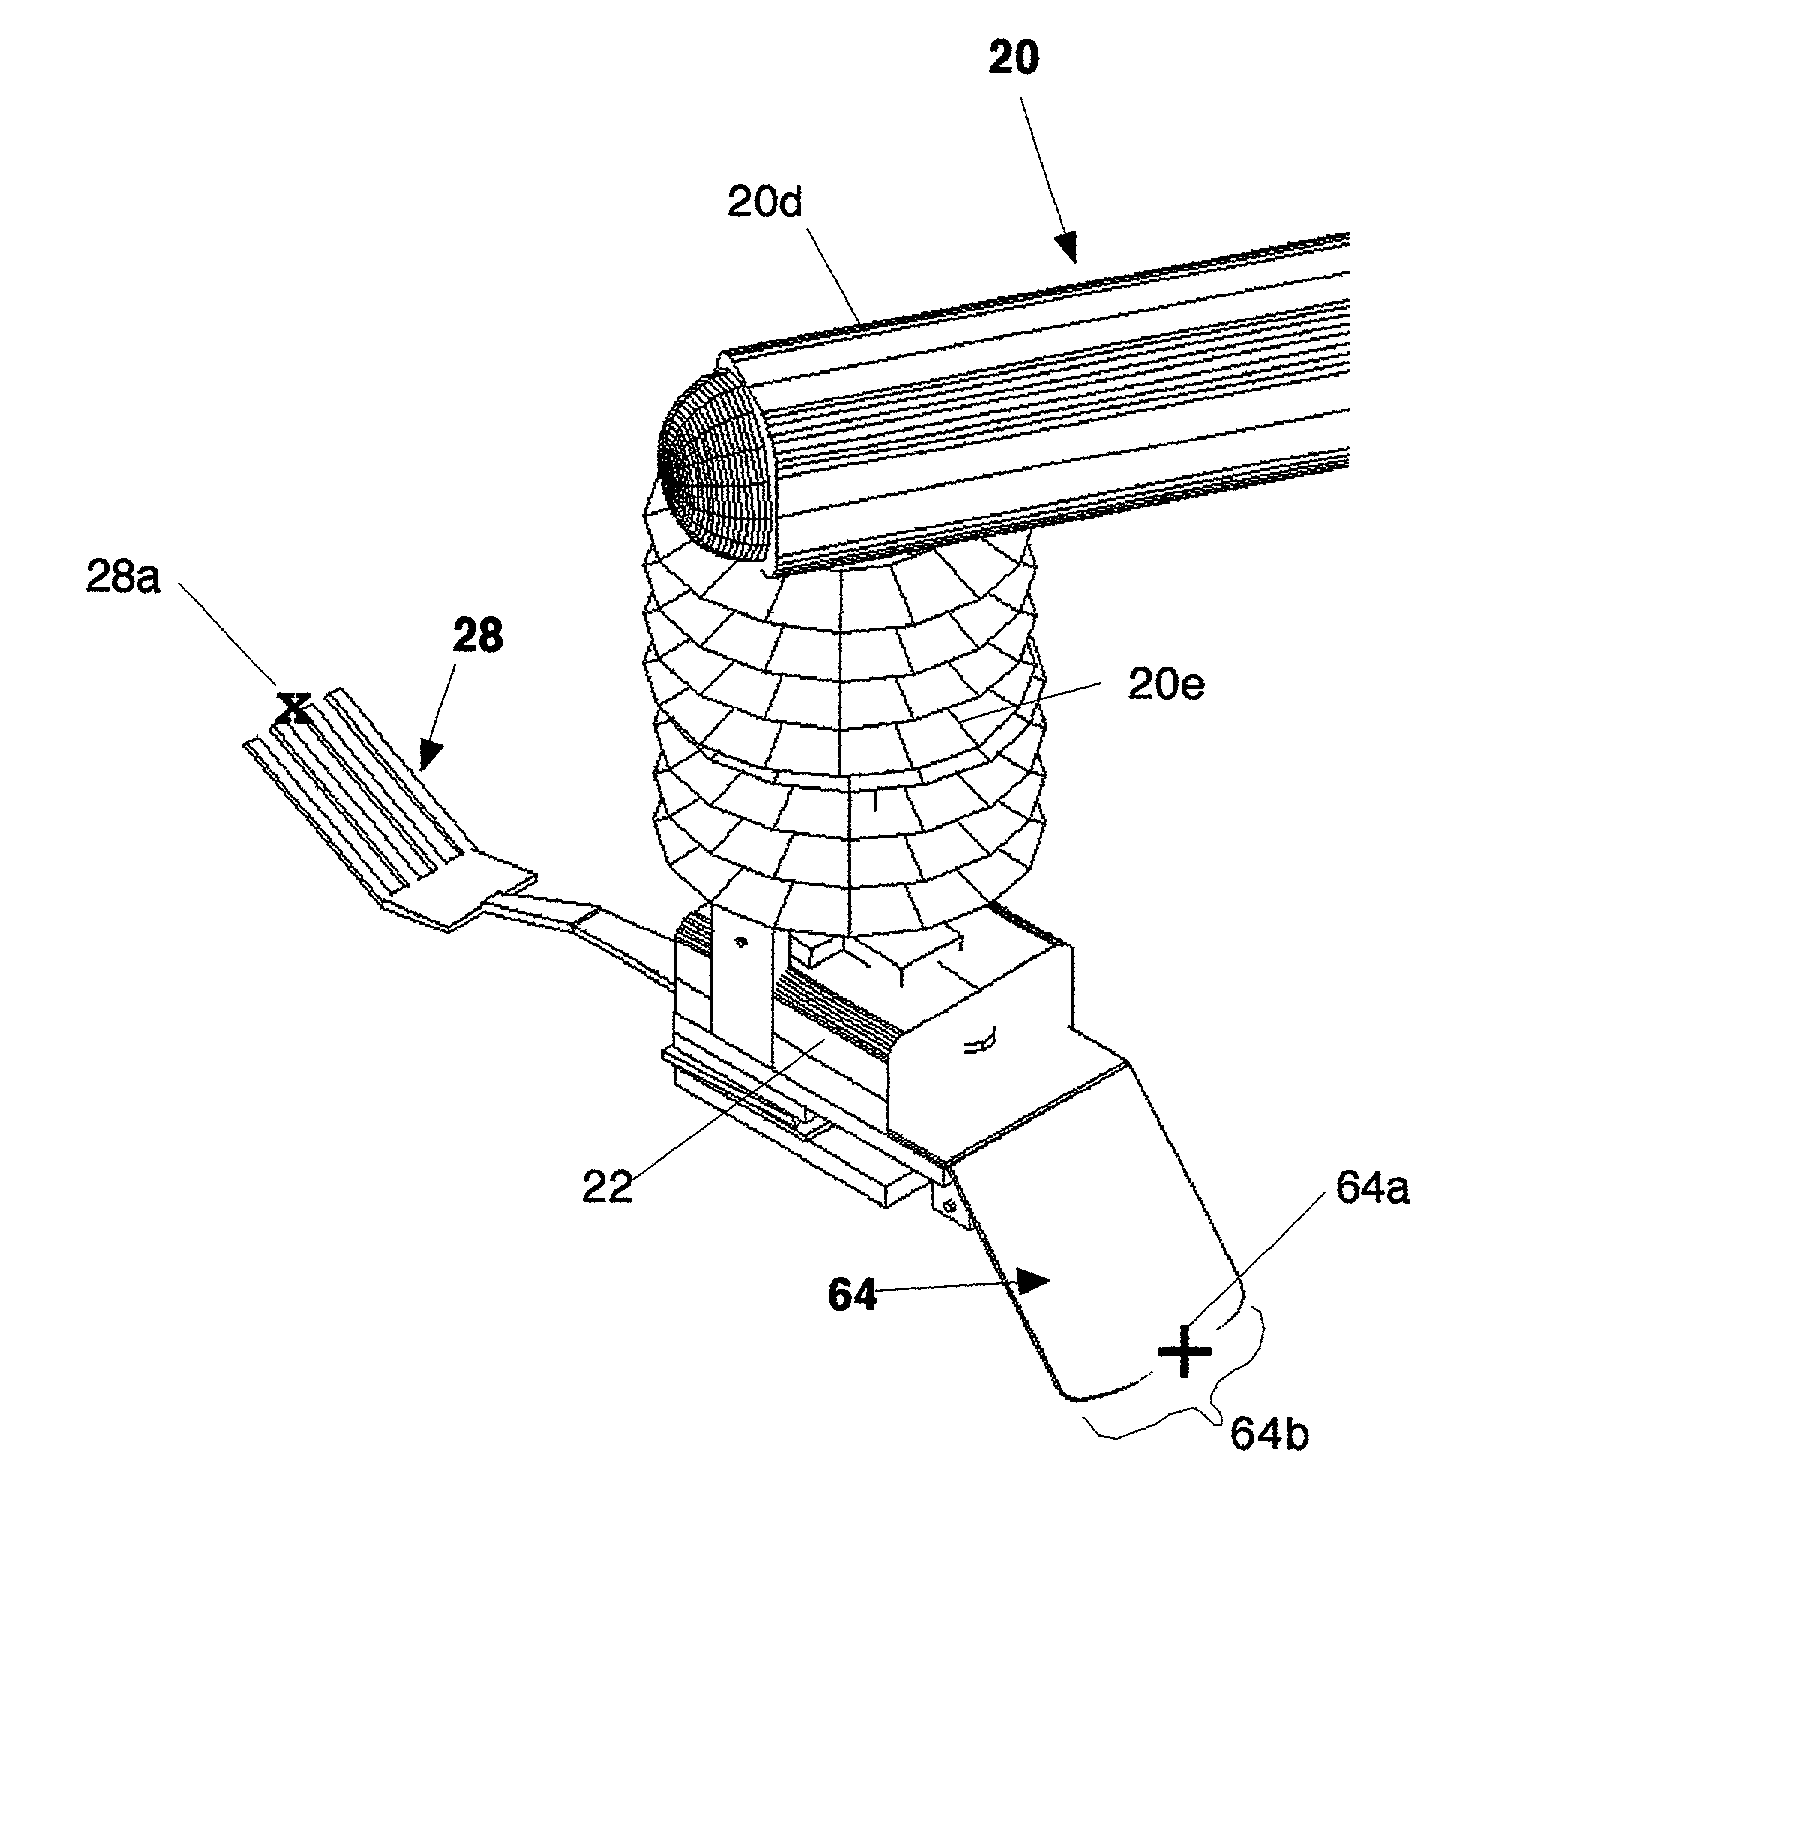 Self-feeding apparatus with hover mode